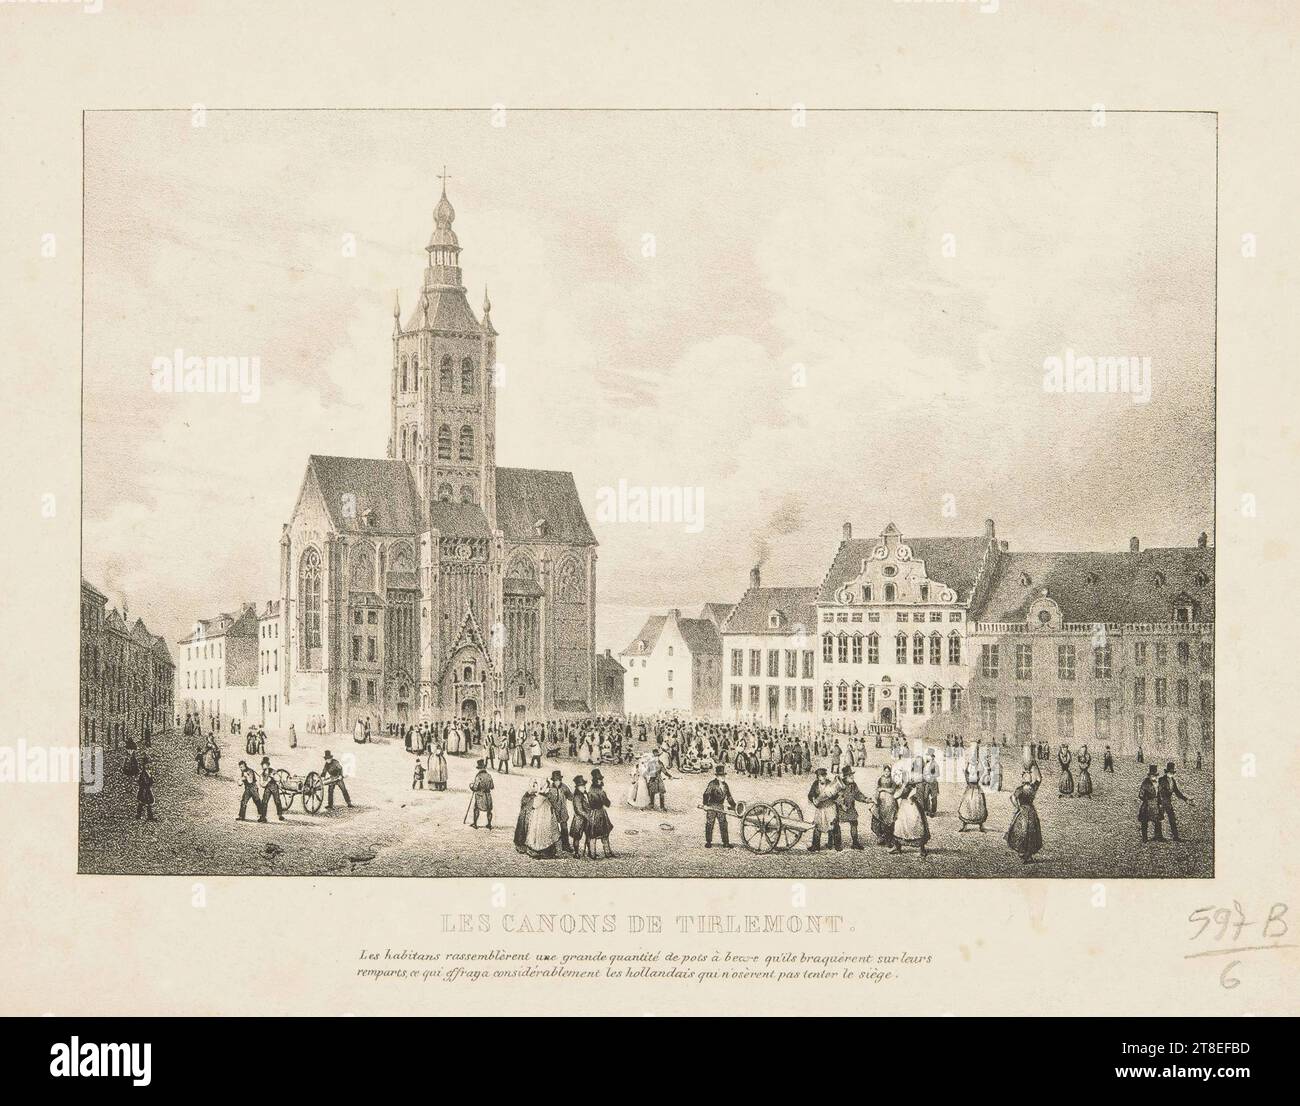 The citizens of Tienen collect butter pots on the Grote Markt in front of the Onze-Lieve-Vrouw-ter Poelkerk, to deploy them as cannon barrels on their defensive walls, 1830. Tienen. Belgian independence. THE CANNONS OF TIRLEMONT. The inhabitants gathered a large quantity of butter pots which they aimed at their ramparts, which considerably frightened the Dutch who did not dare to attempt the siege Stock Photo